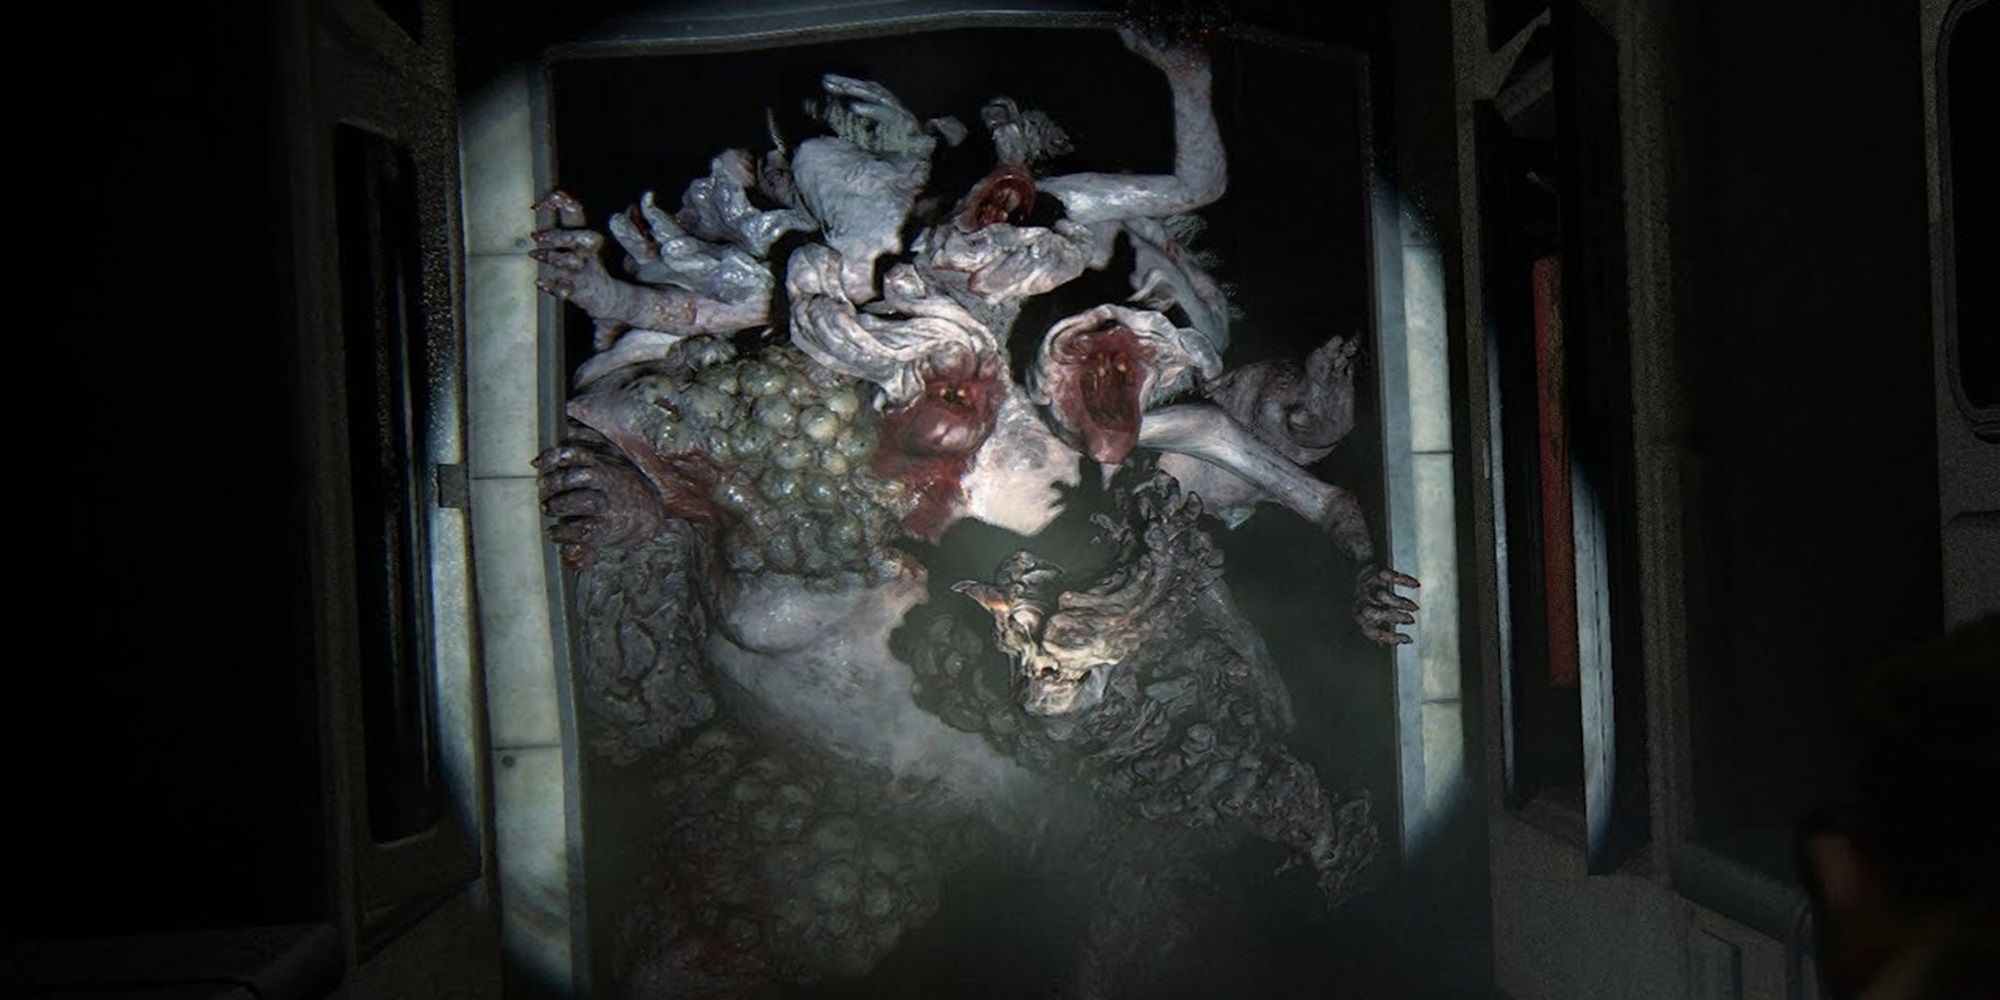 The Rat King appears in The Last of Us Part II